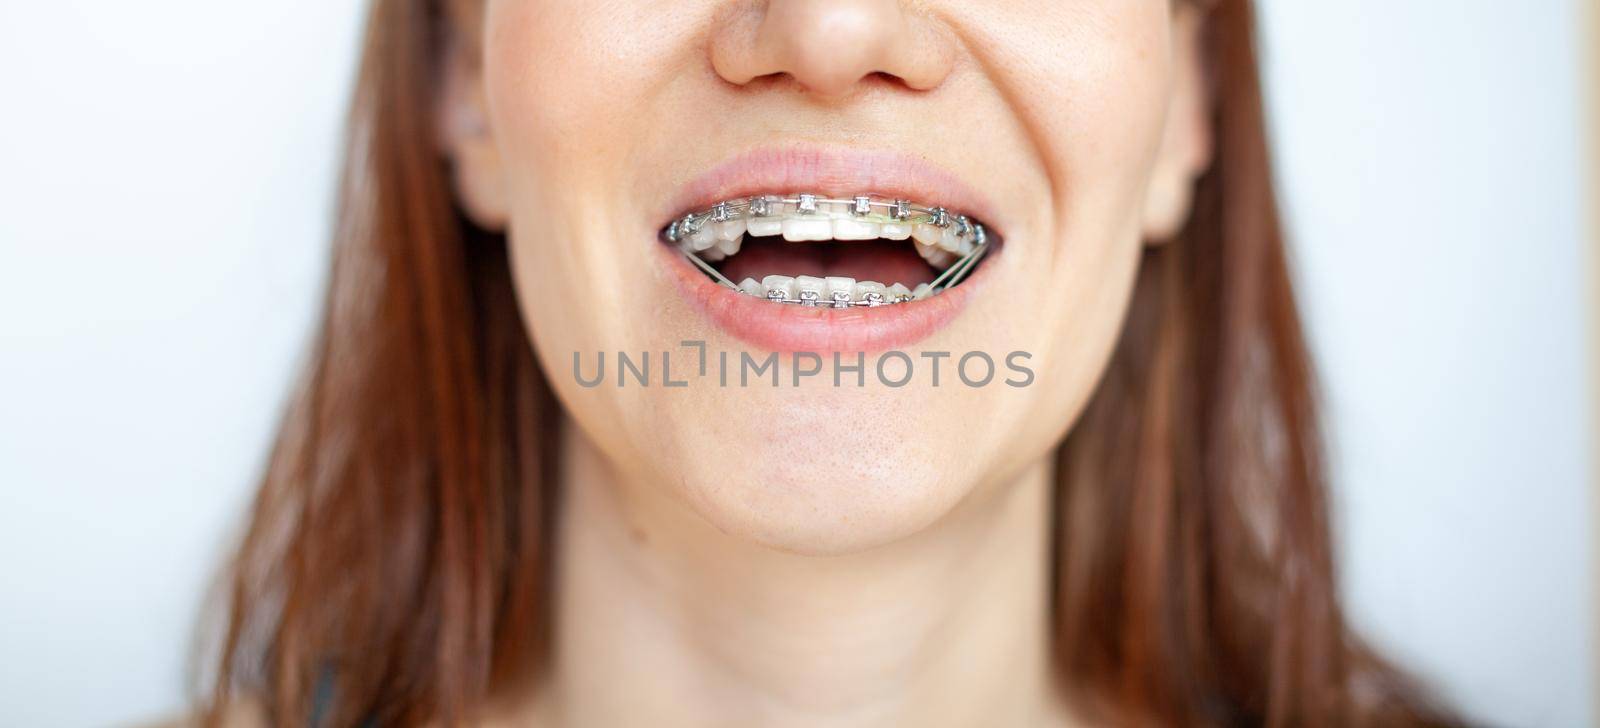 The woman smiles, showing her white and even teeth with braces. by AnatoliiFoto